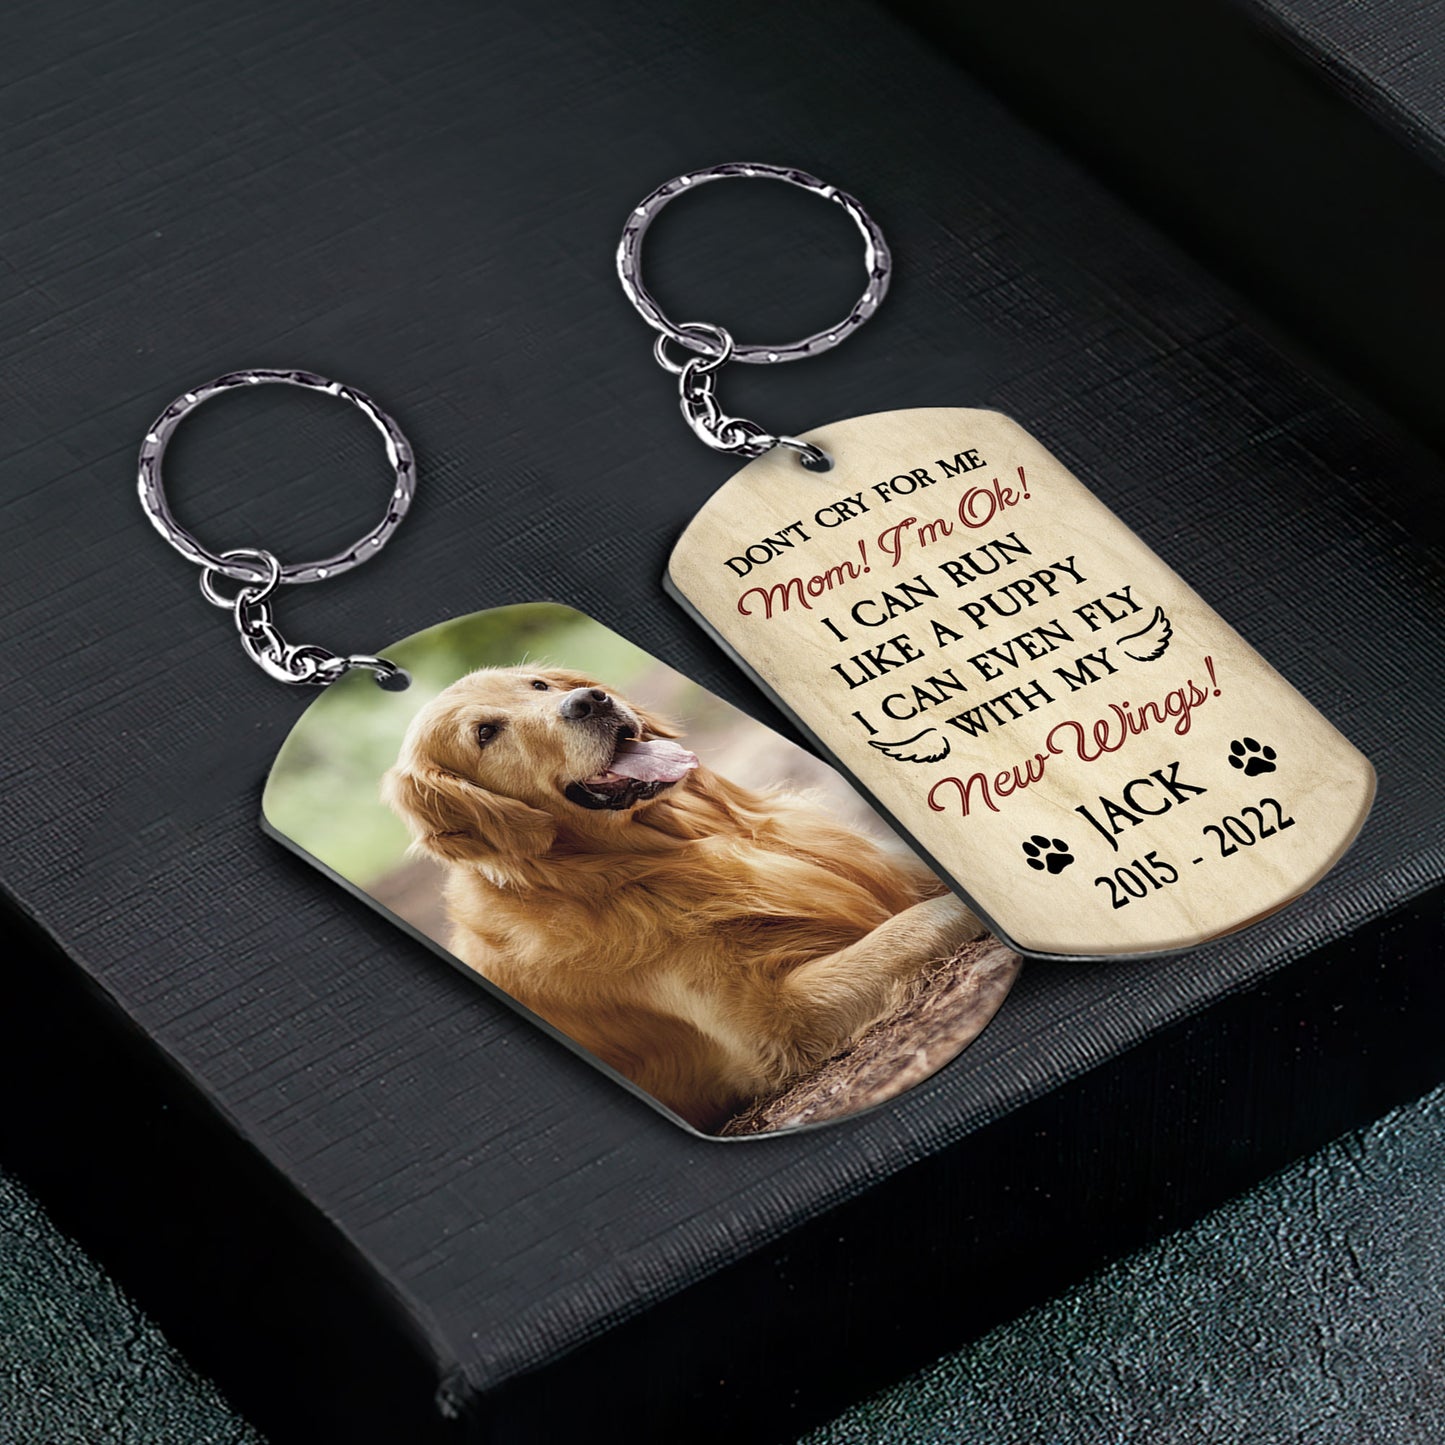 Don't Cry For Me - Personalized Photo Keychain